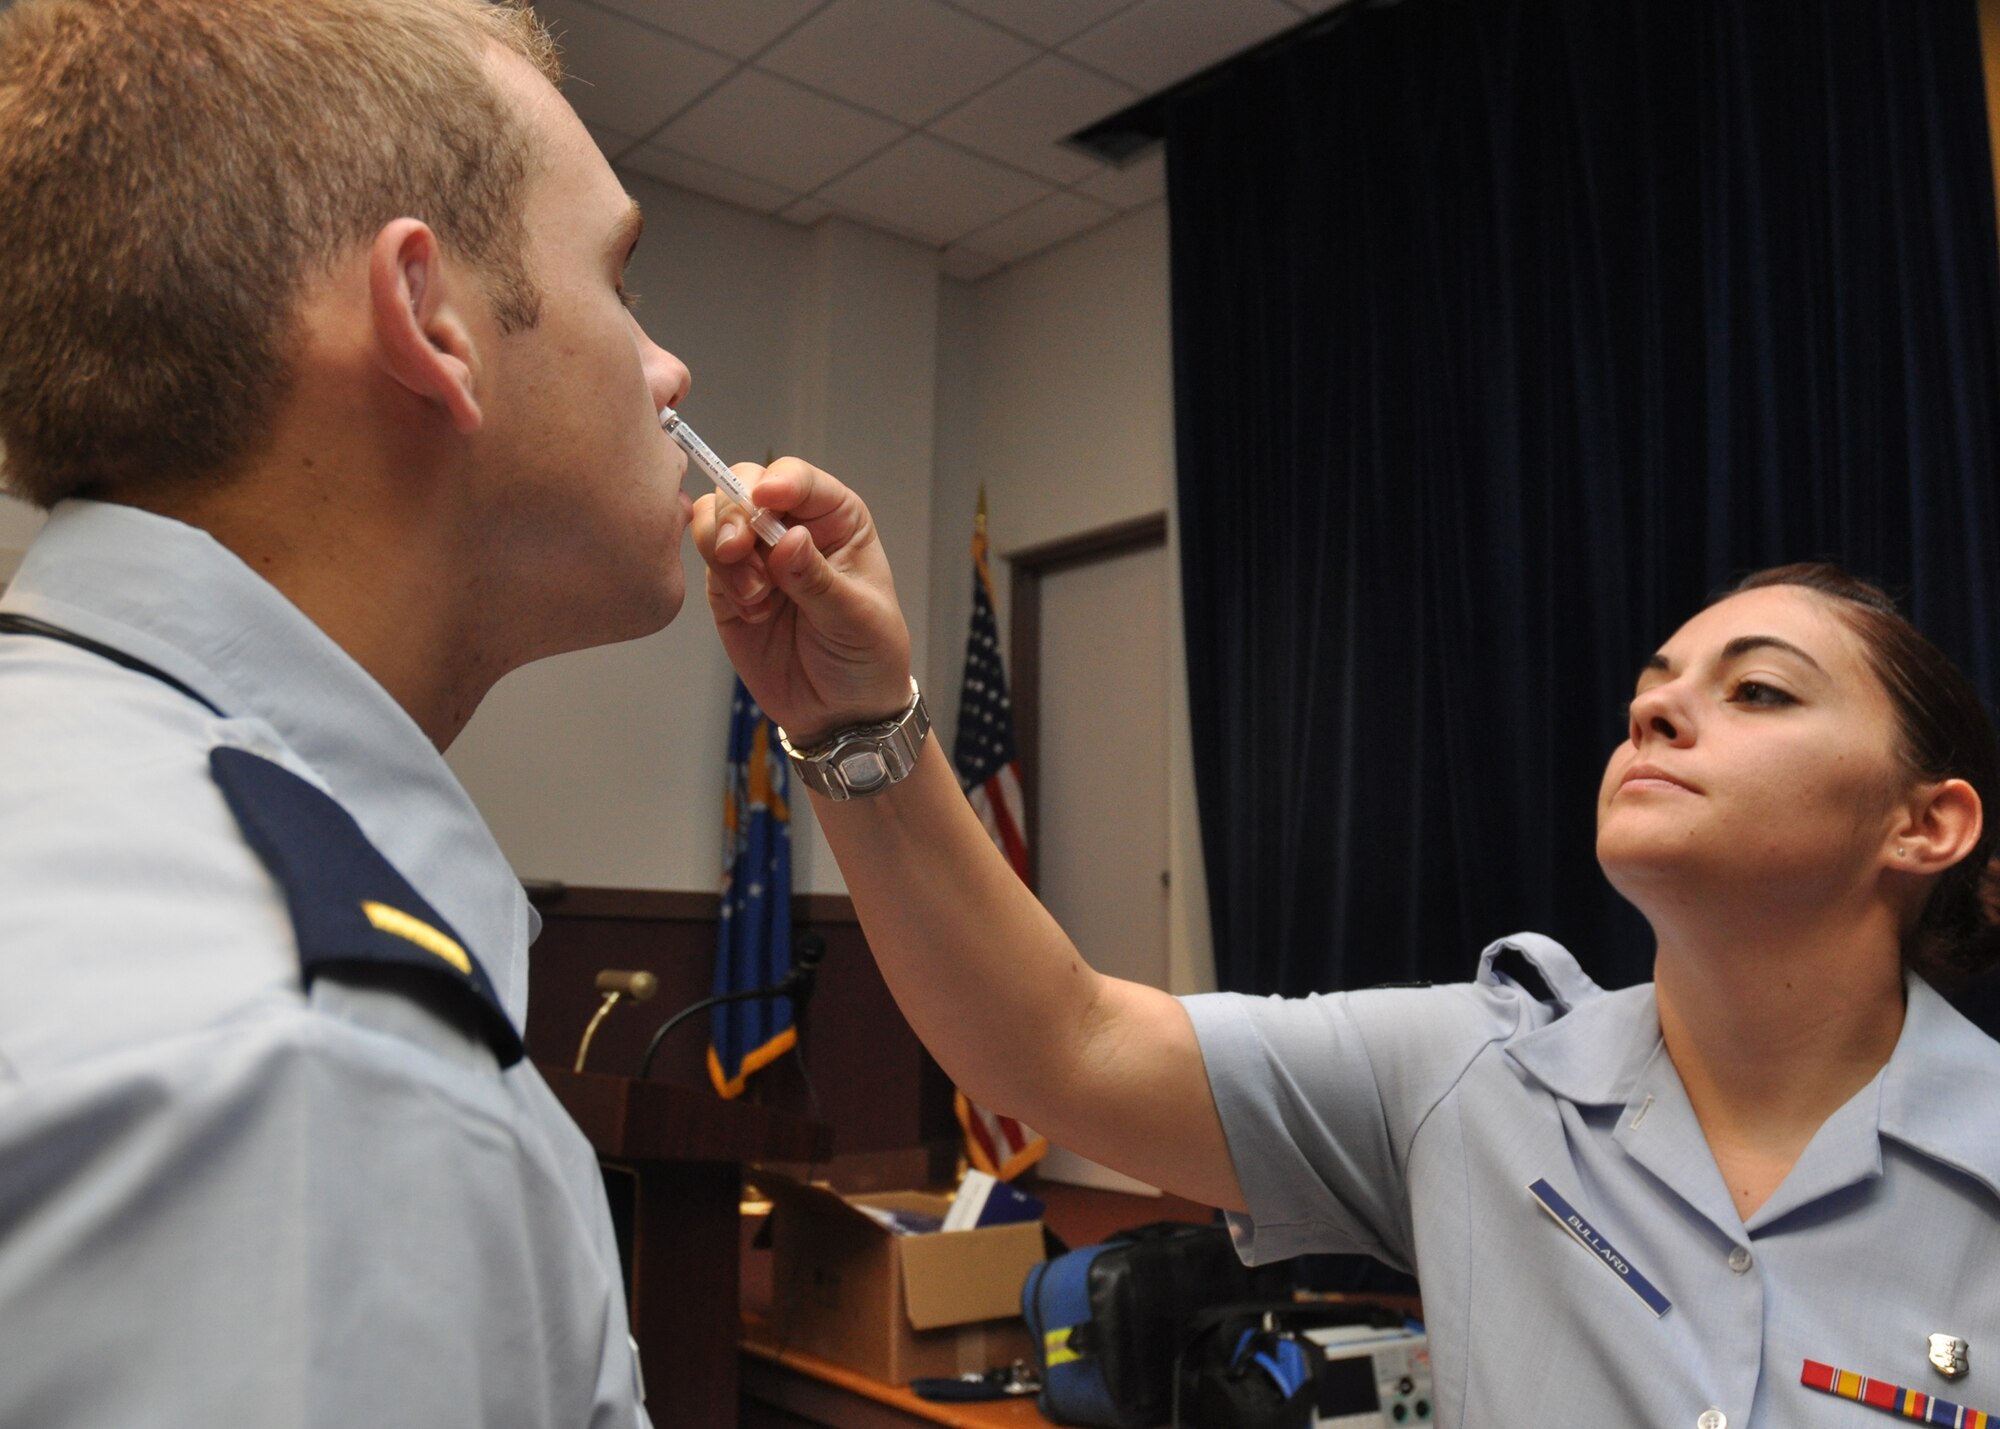 Airman 1st Class Amberle Bullard, 96th Surgical Operations Squadron, administers the flu-mist vaccination to an active duty member at Bldg. 439 Sept. 21.  Flu vaccinations will be given all week to active-duty members from 6 a.m. to 6 p.m.  (U.S. Air Force photo/Airman 1st Class Chris Jacobs)